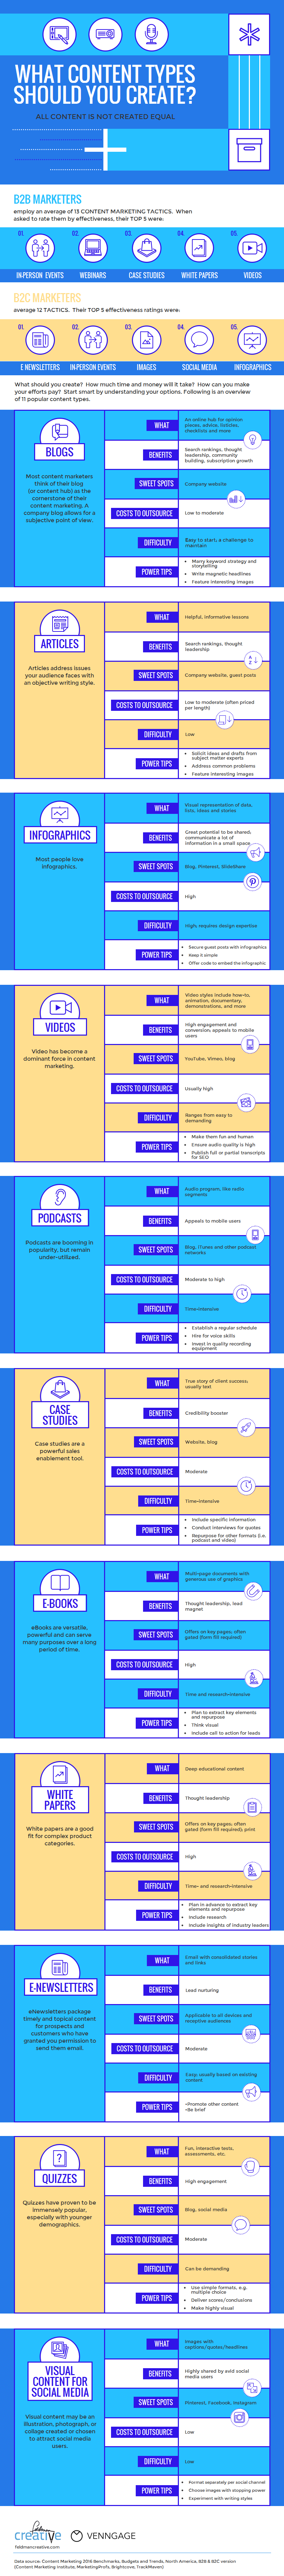 Branded Content Types Infographic 